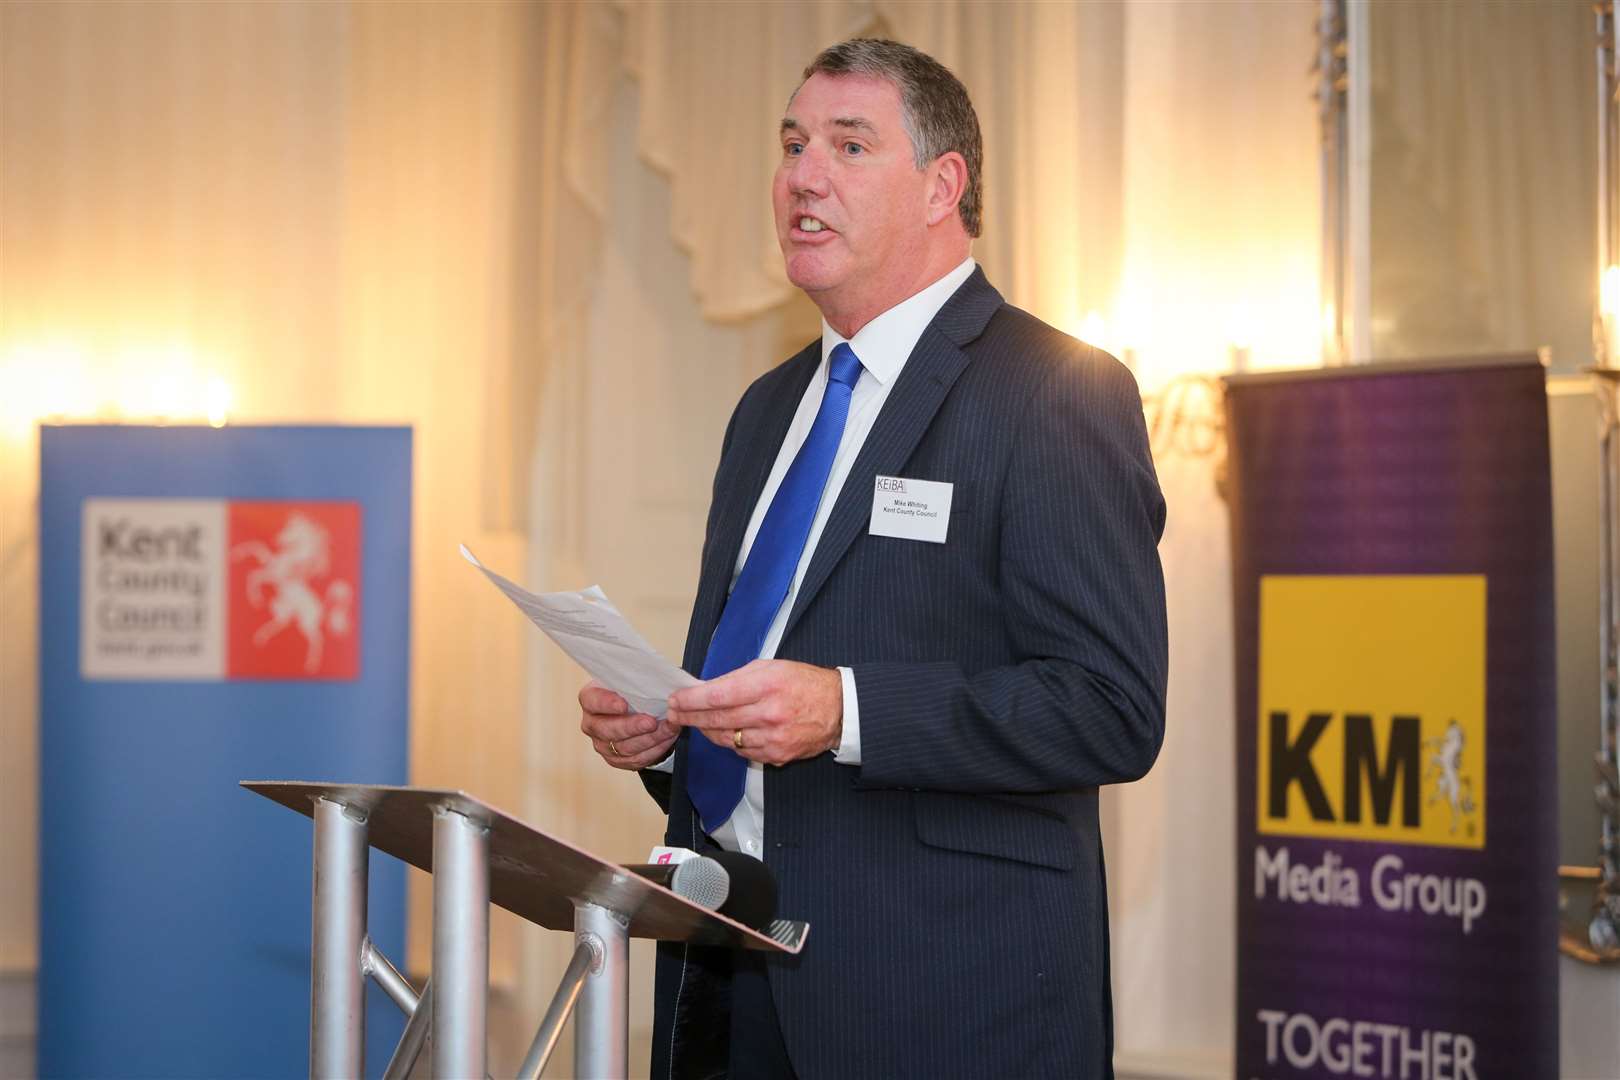 KCC's Mike Whiting is urging the self-employed to take advantage of the grant